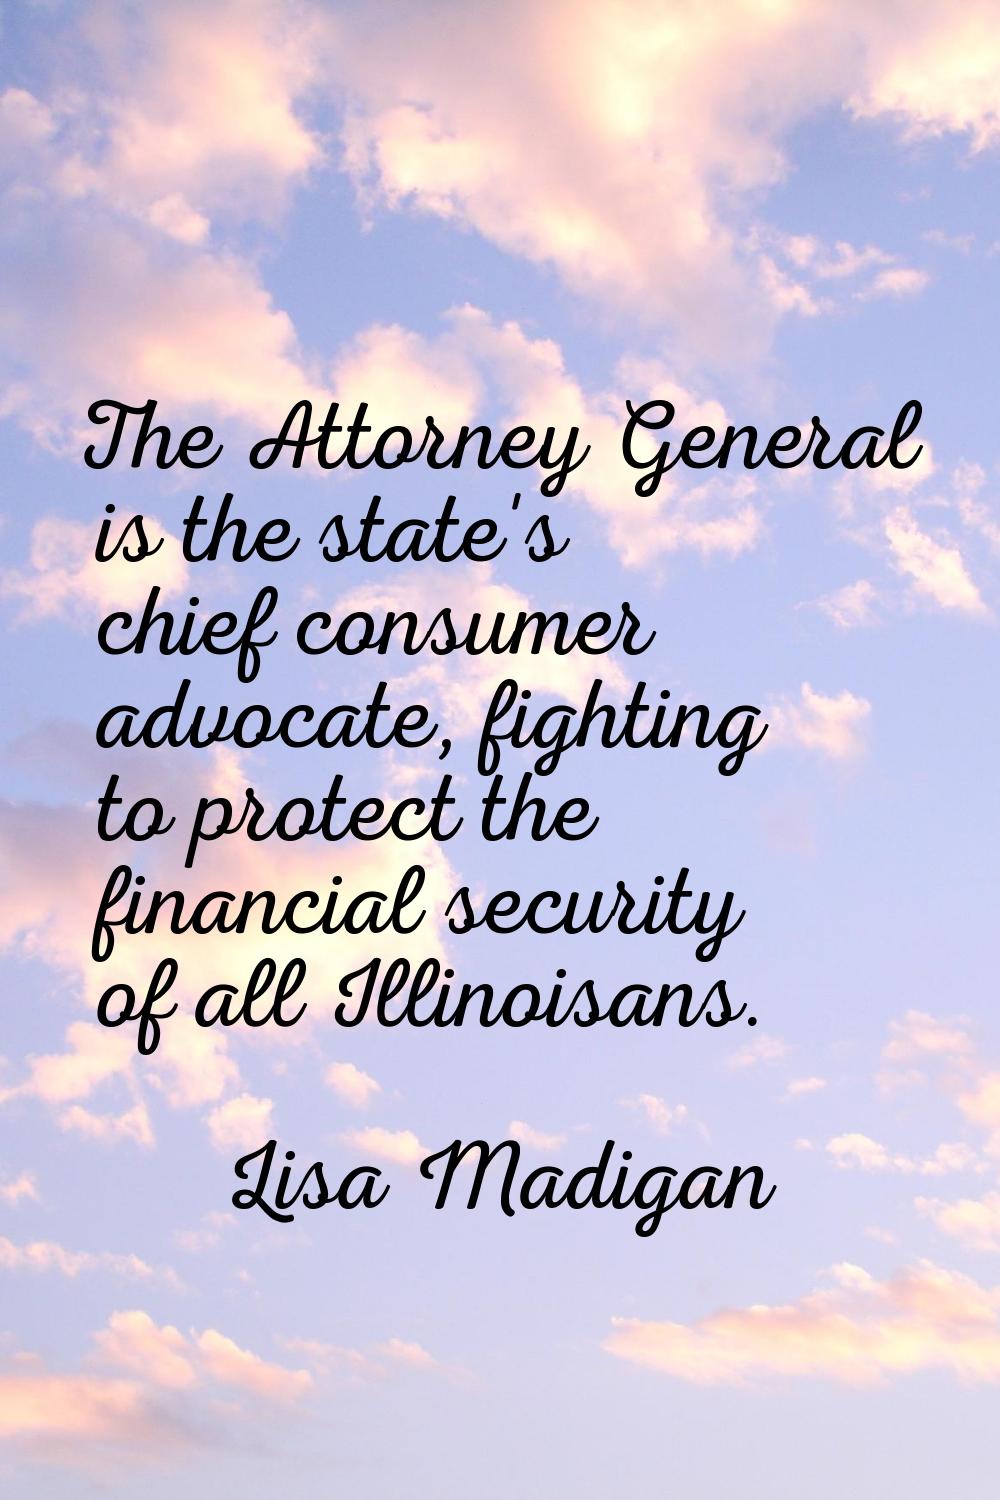 The Attorney General is the state's chief consumer advocate, fighting to protect the financial secu